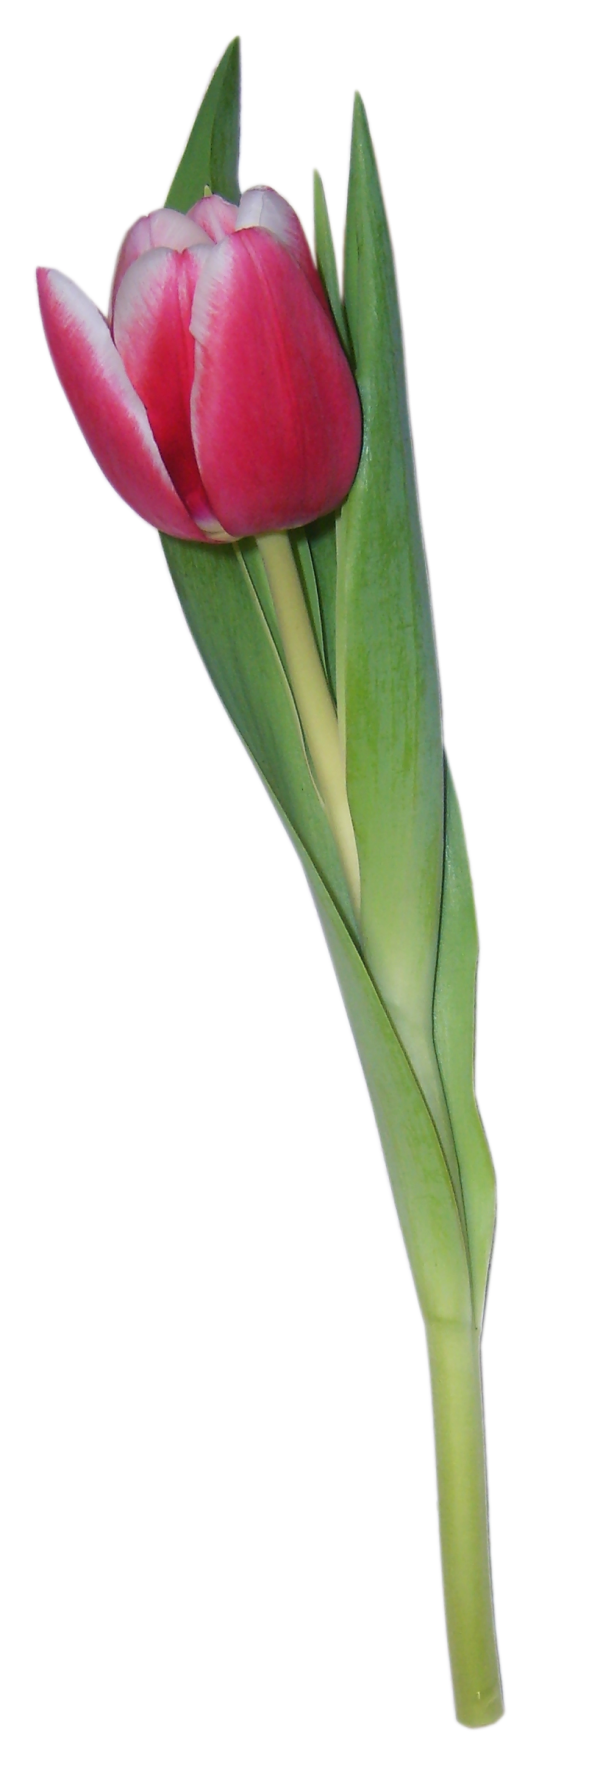 Tulip PNG Free Download 4 | PNG Images Download | Tulip PNG Free ...